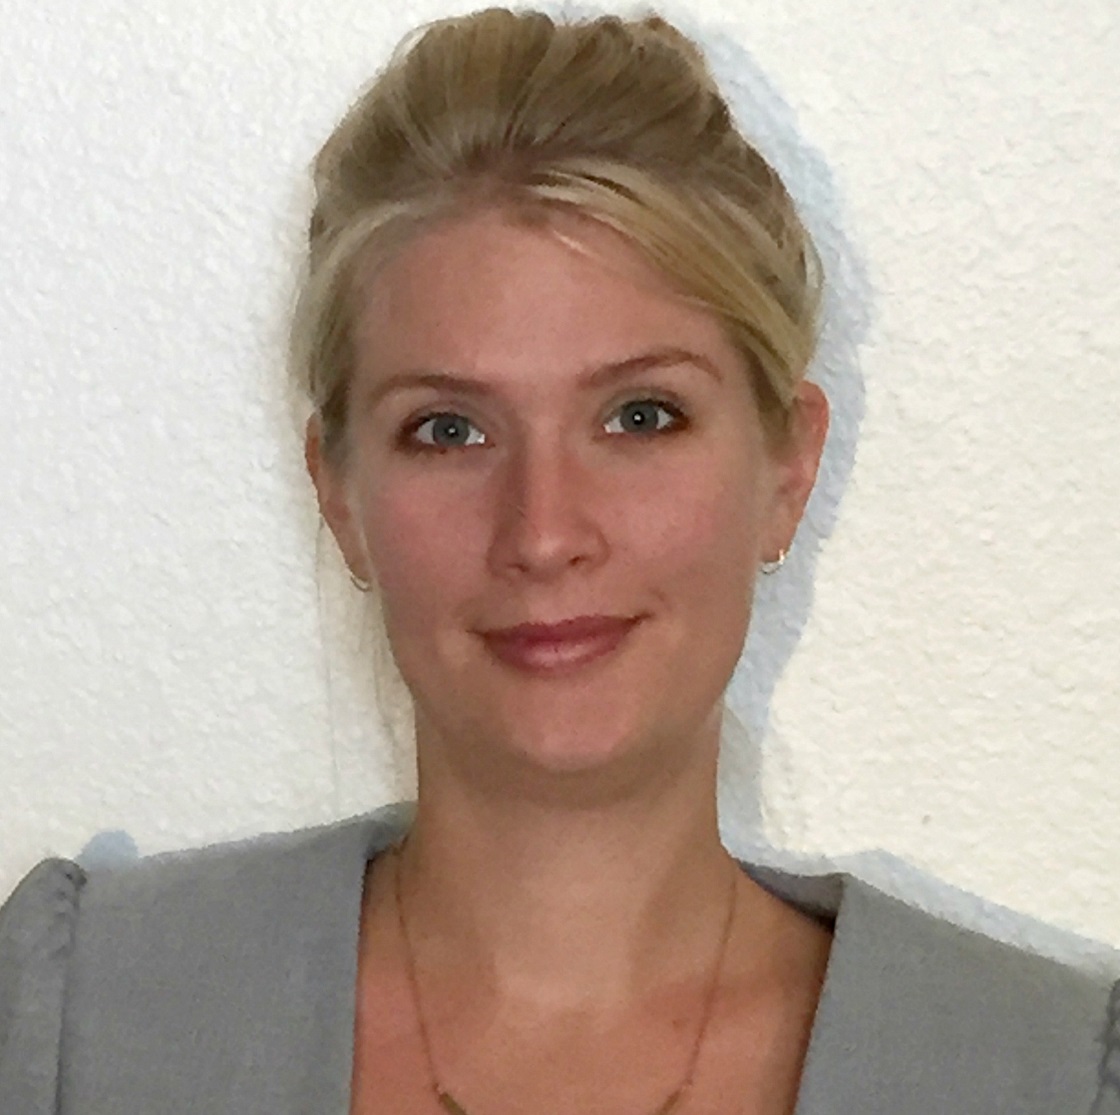 Ulrika Andersson, tidigare student